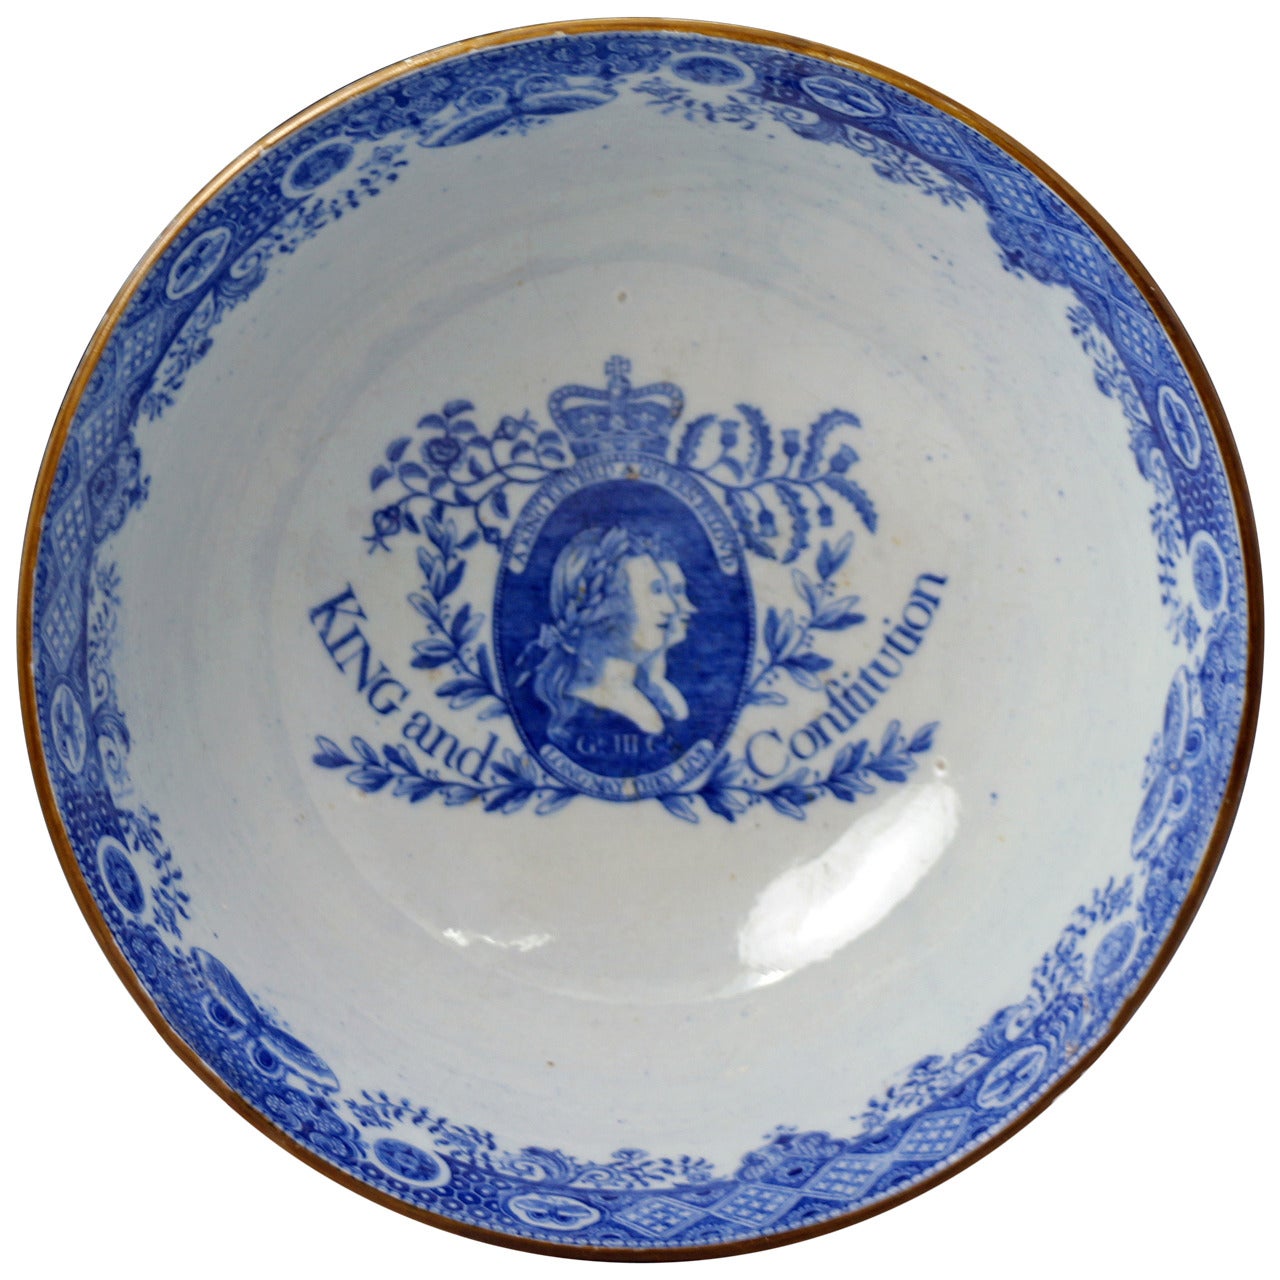 English pearlware bowl commemorating "King and Constitution" antique period